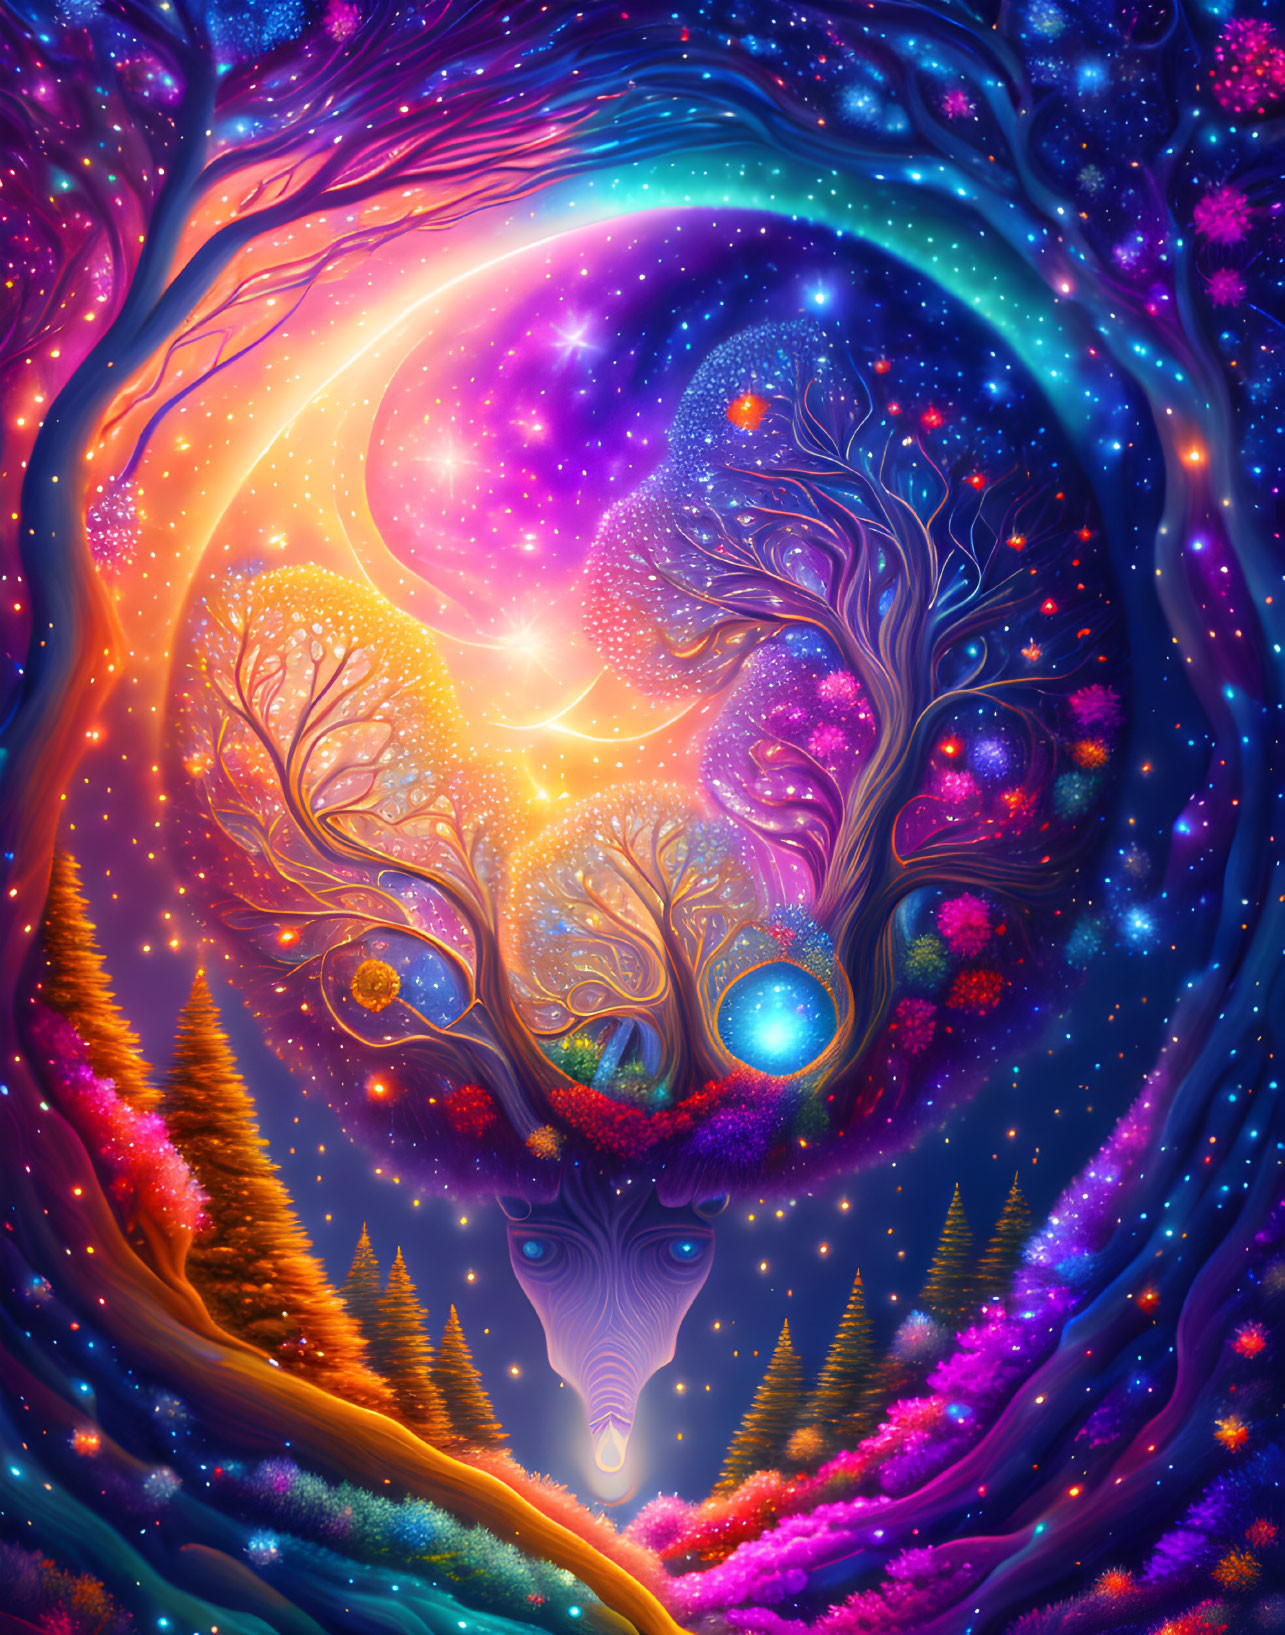 Fantasy landscape with magic trees and celestial elements